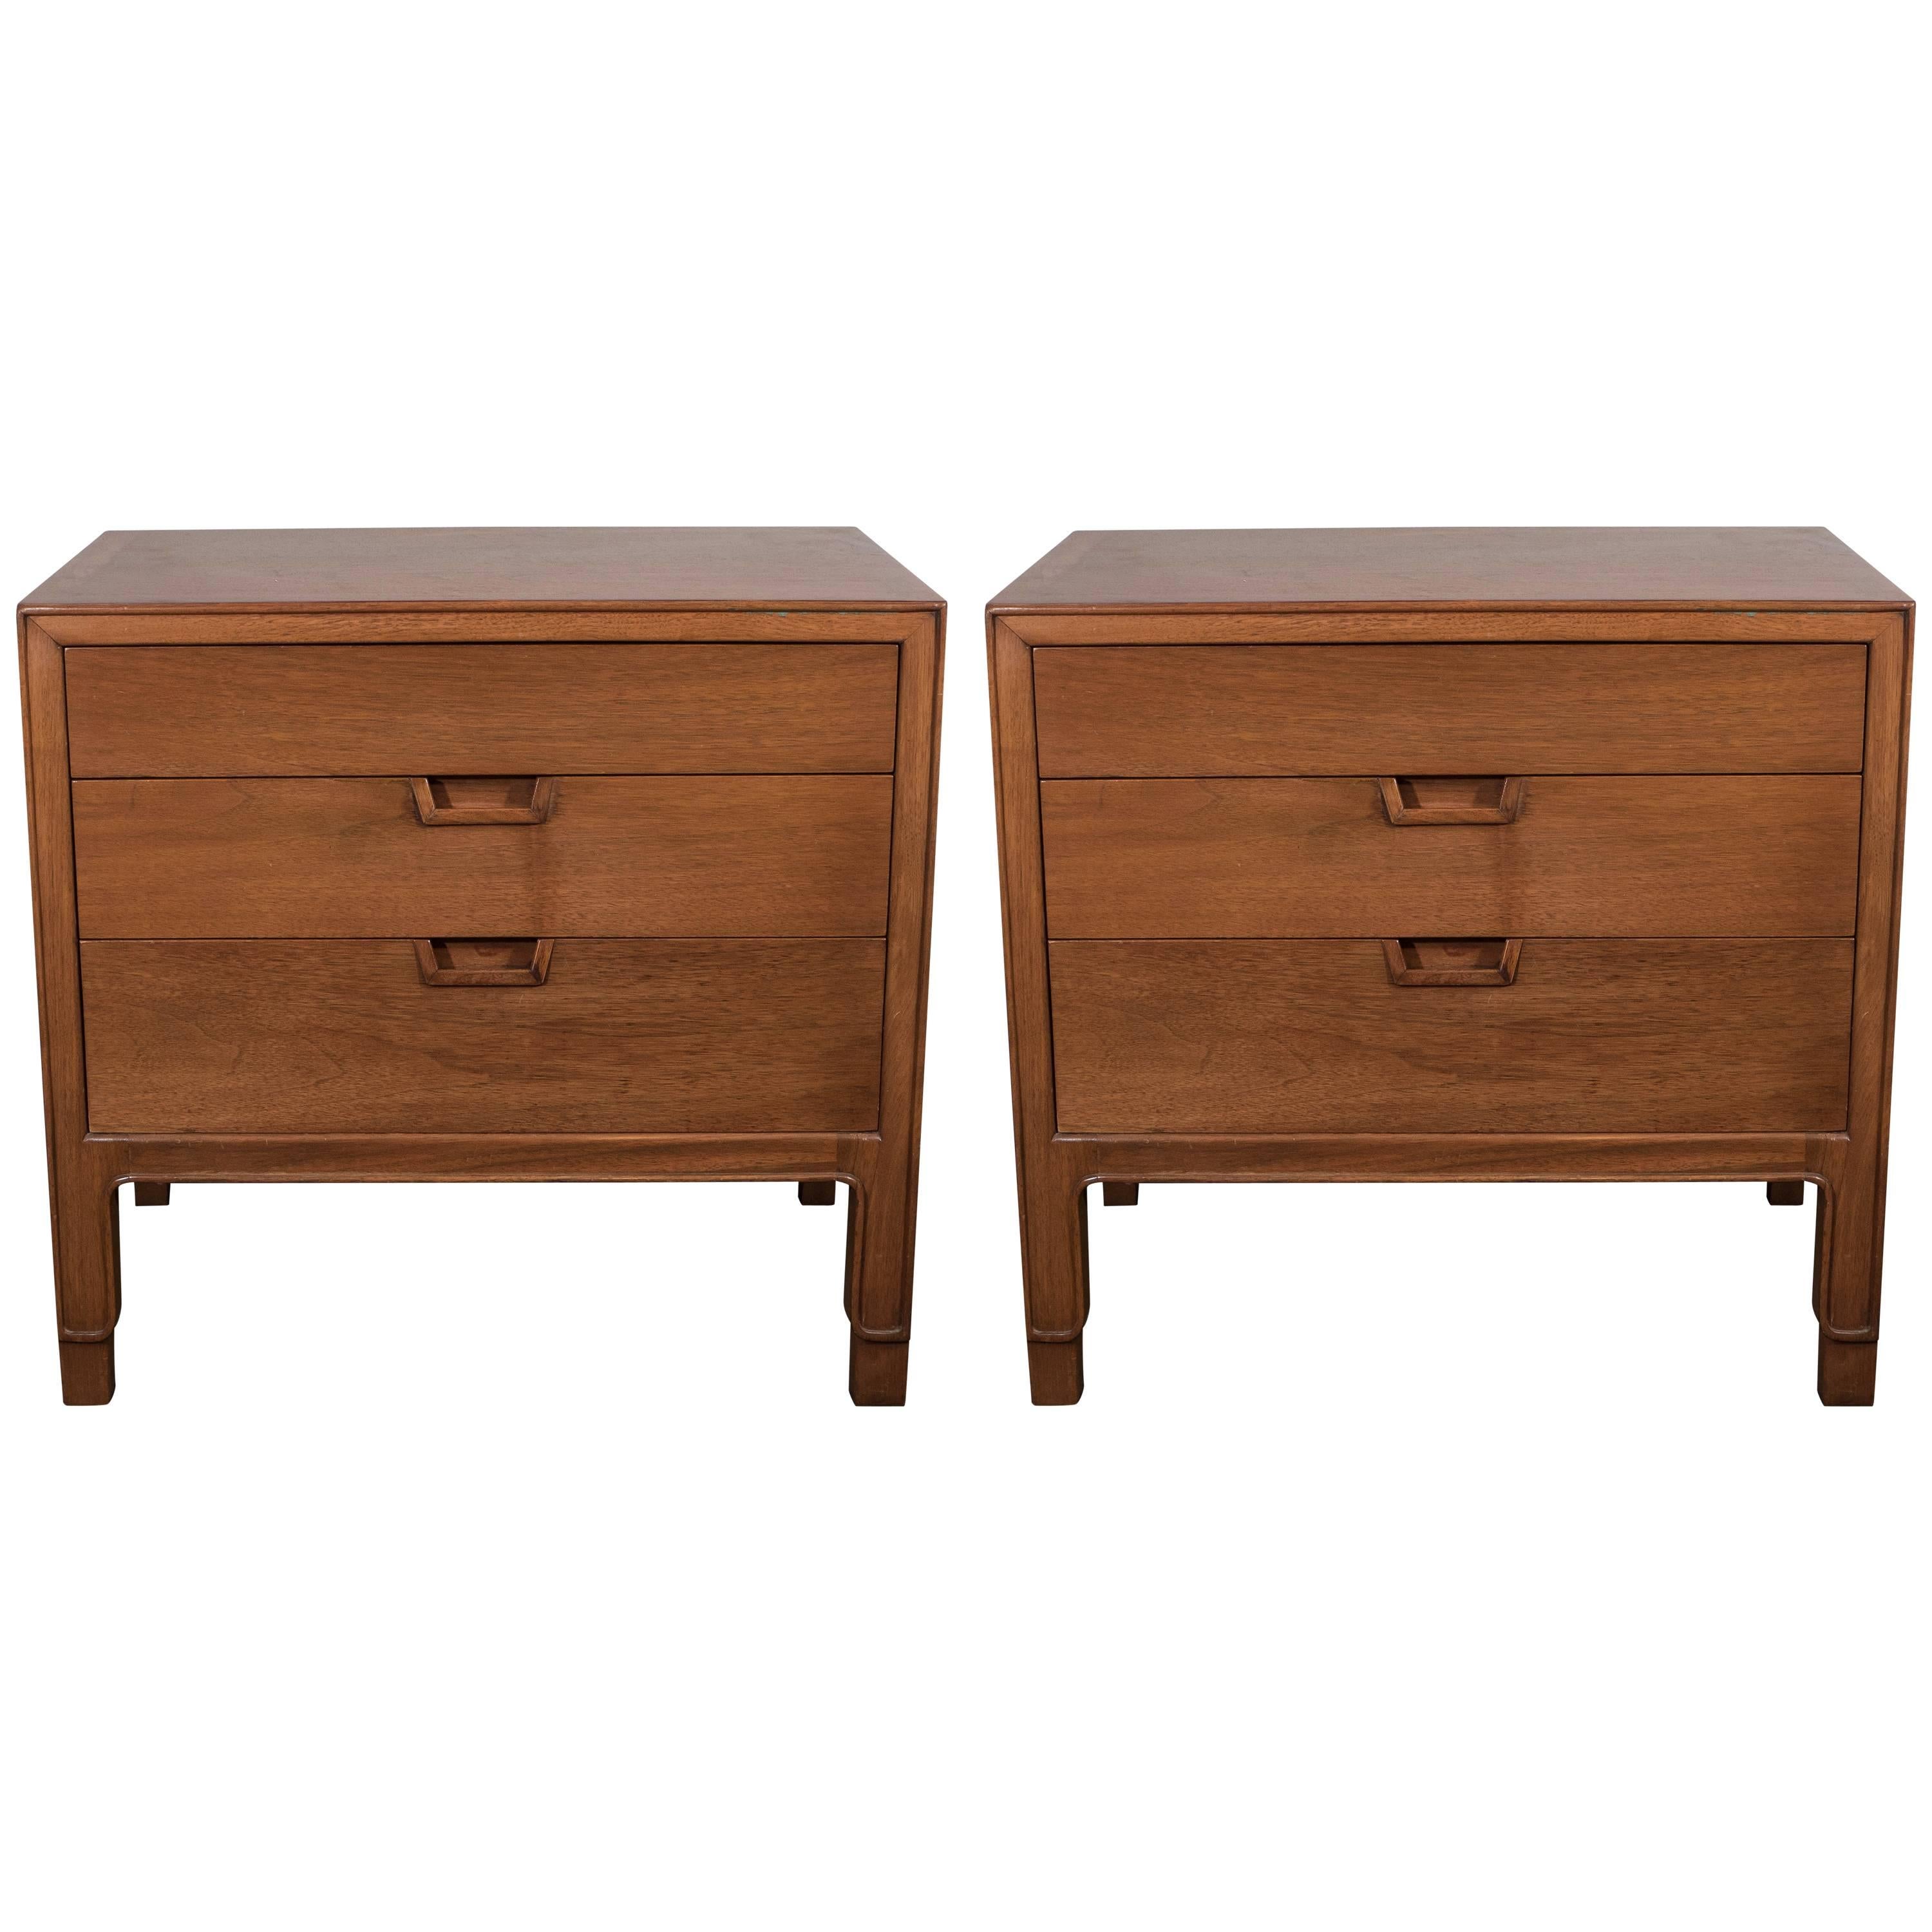 Pair of John Stuart Wood Nightstands and End Tables for Janus Collection